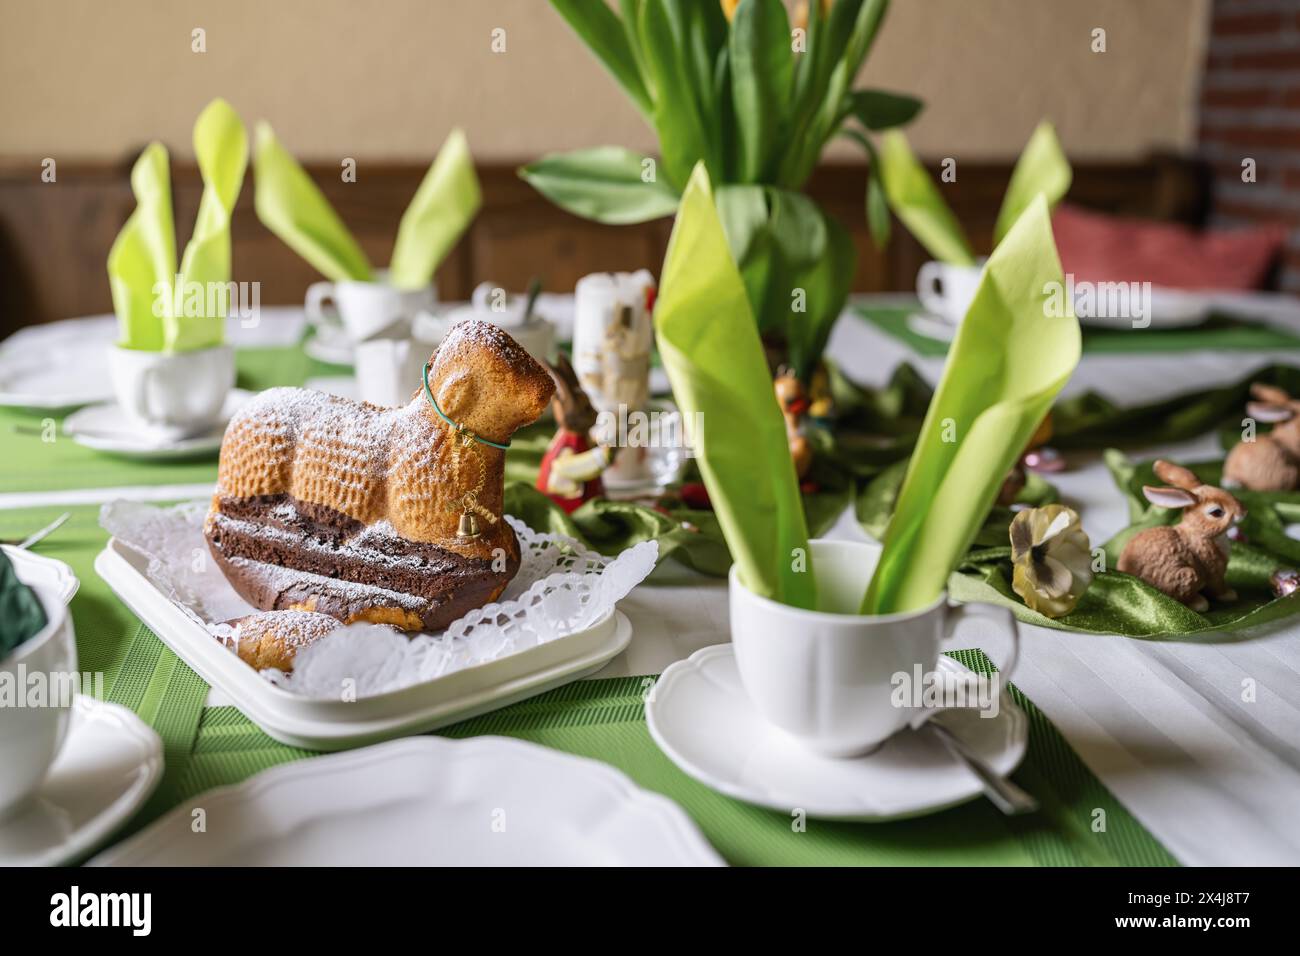 Easter-themed table setting with cake lamb dusted with powdered sugar, tulips, and decorations Stock Photo